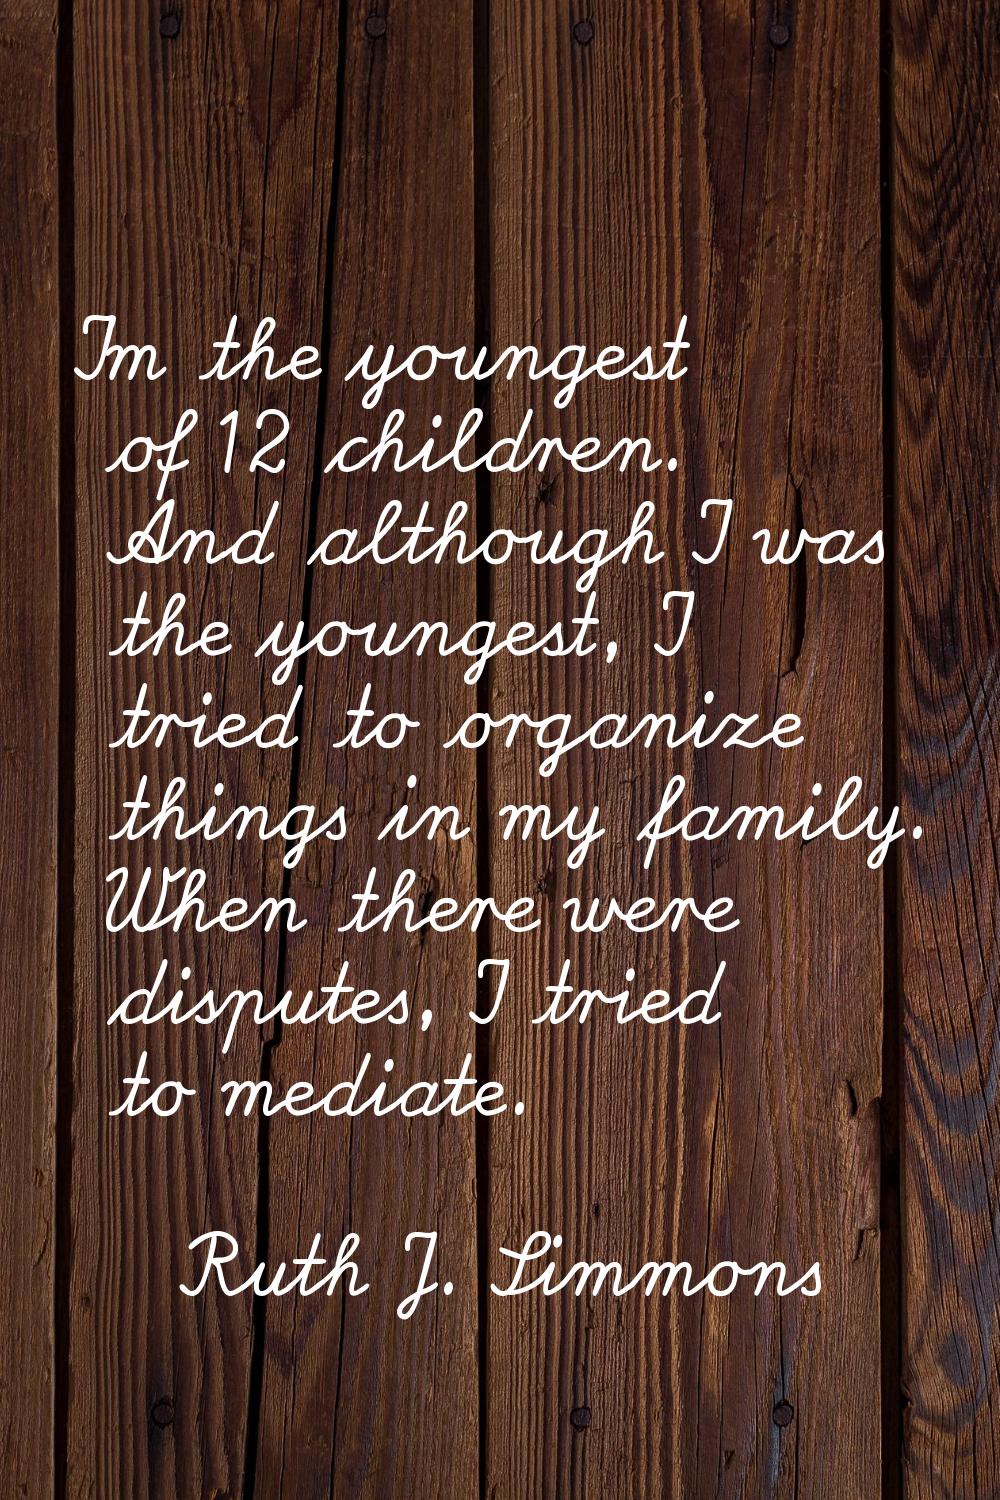 I'm the youngest of 12 children. And although I was the youngest, I tried to organize things in my 